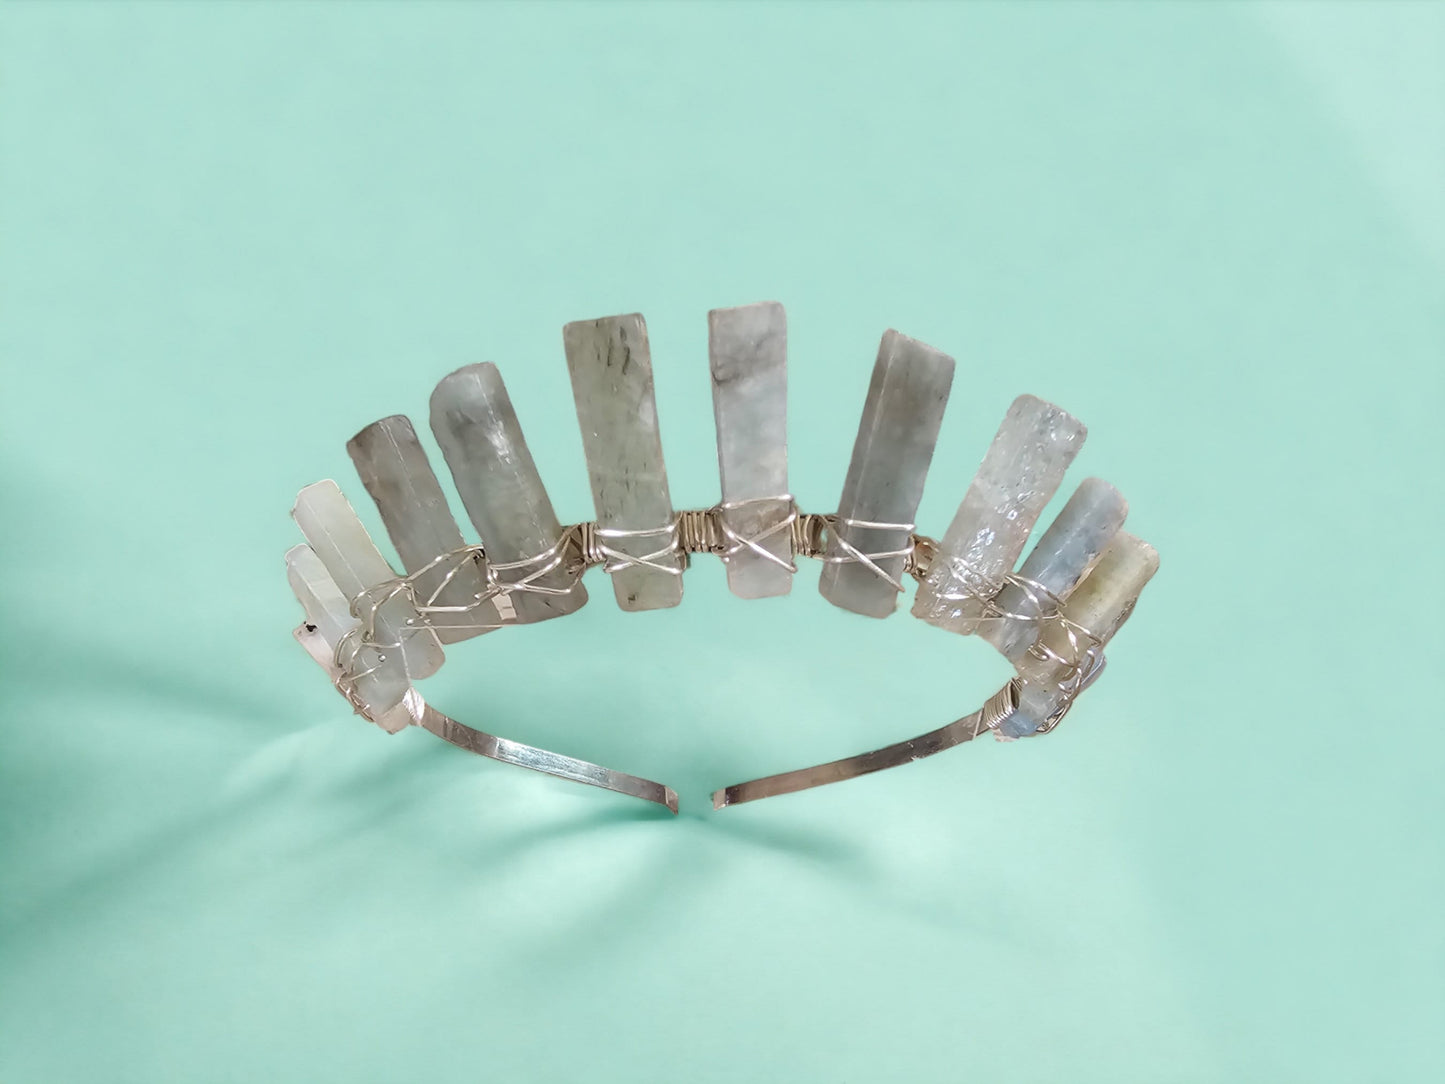 Aquamarine Crystal Crown for Clarity & Peace